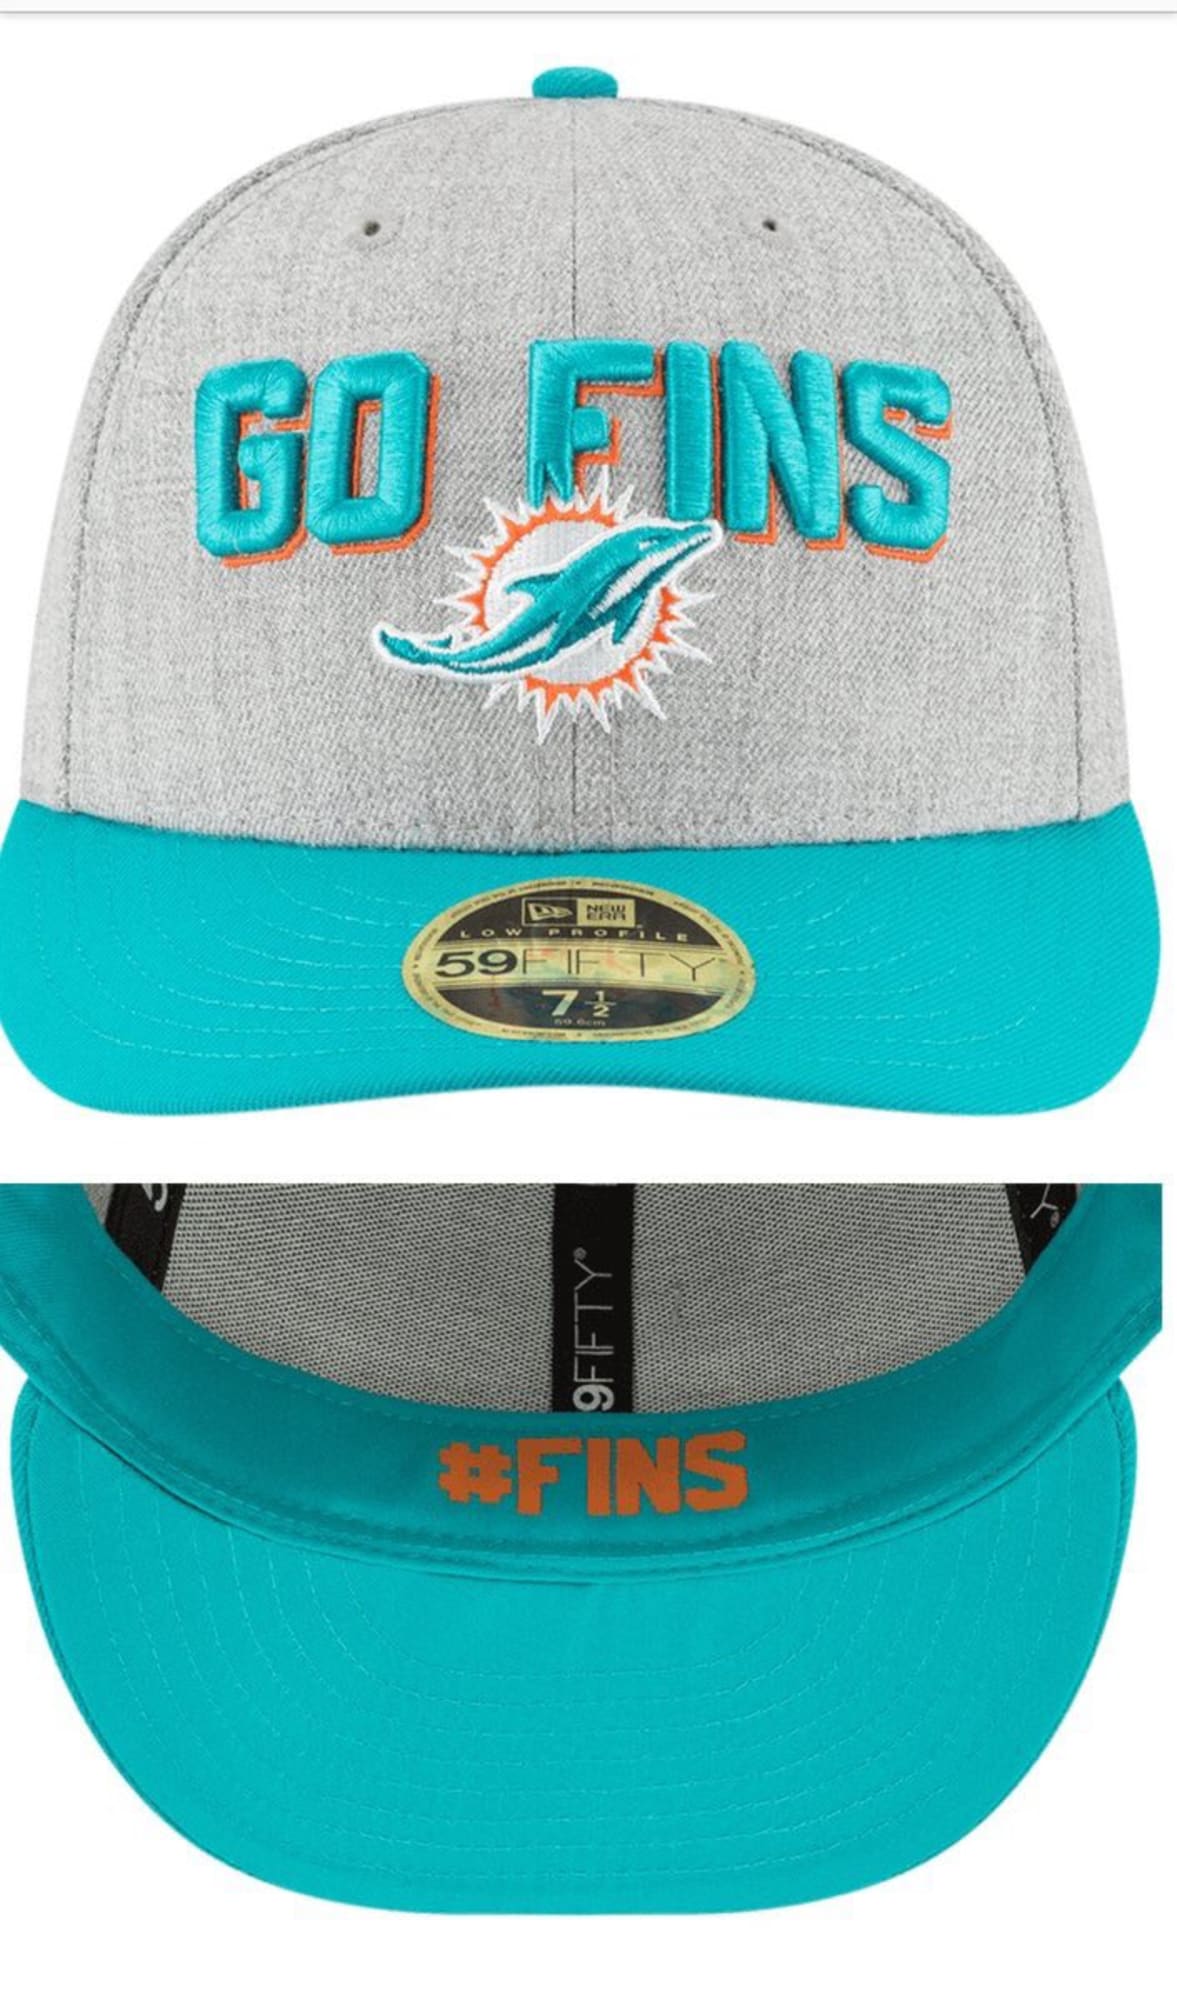 Miami Dolphins NFL Draft day hat and no more color rush jerseys